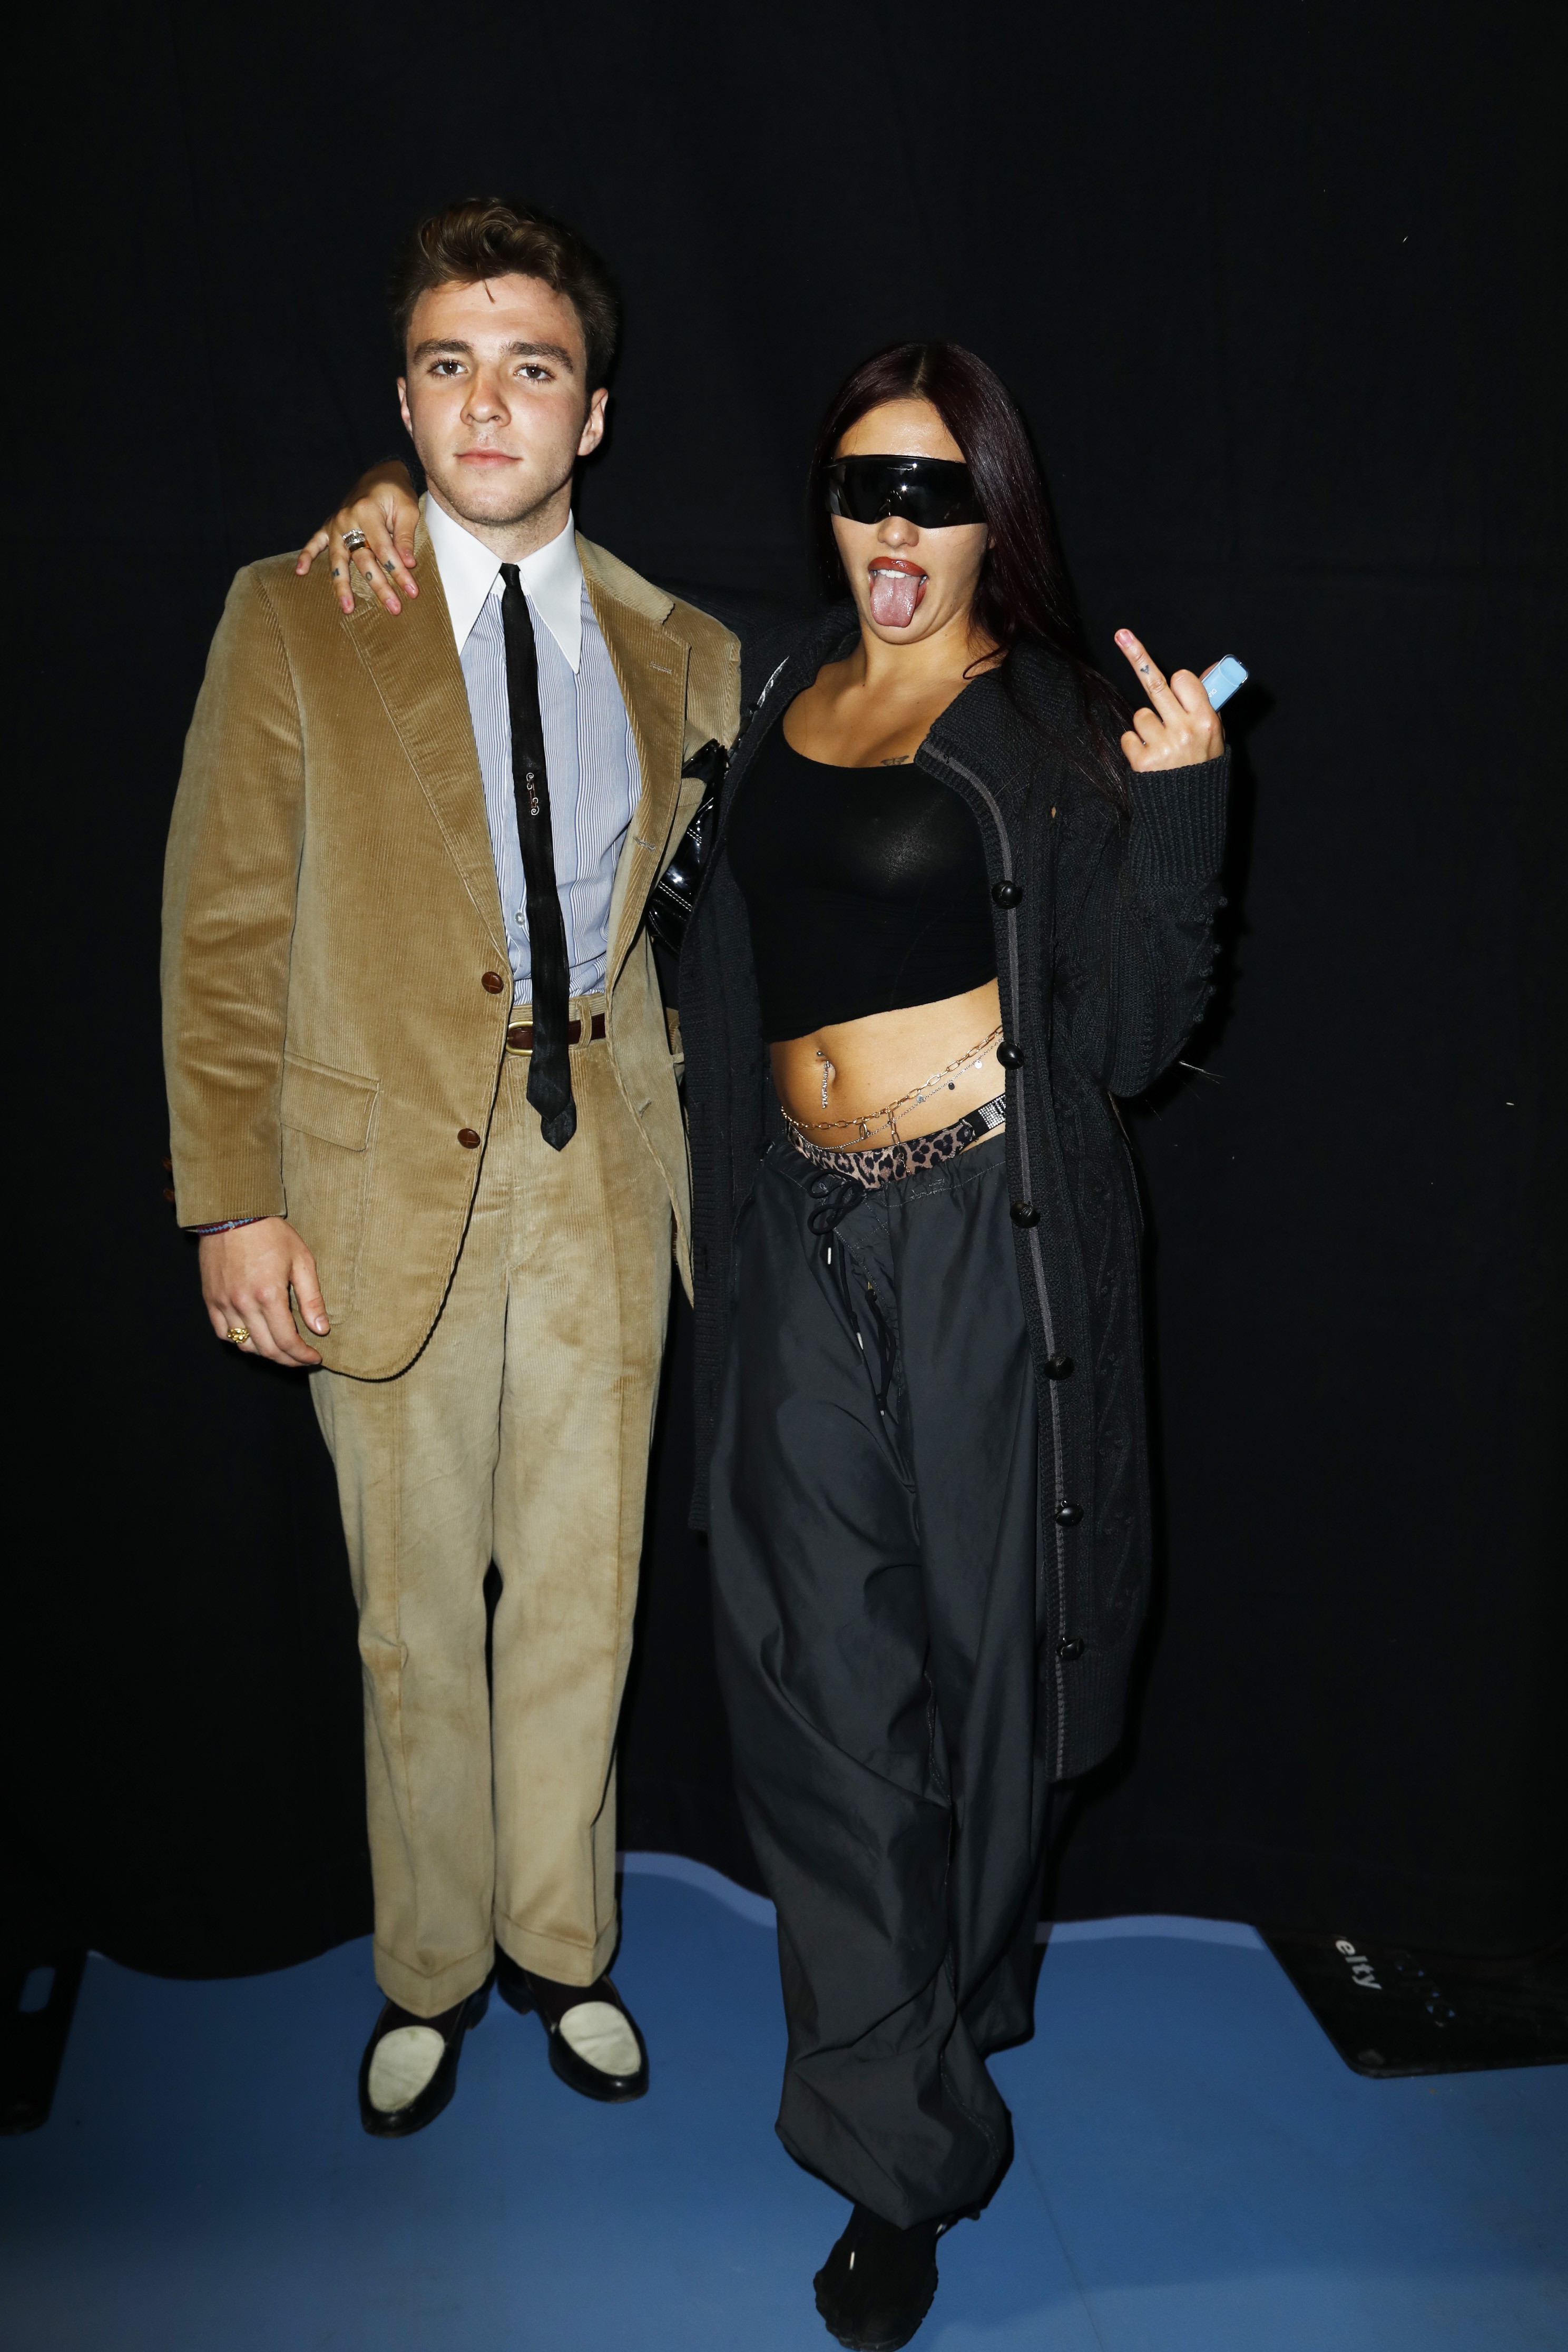 PARIS, FRANCE - JUNE 25: (EDITORIAL USE ONLY - For Non-Editorial use please seek approval from Fashion House) (EDITOR'S NOTE: Image contains profanity) Rocco Ritchie is pictured backstage with his sister Lourdes Leon after the Marine Serre Menswear Spring (Foto: Getty Images)